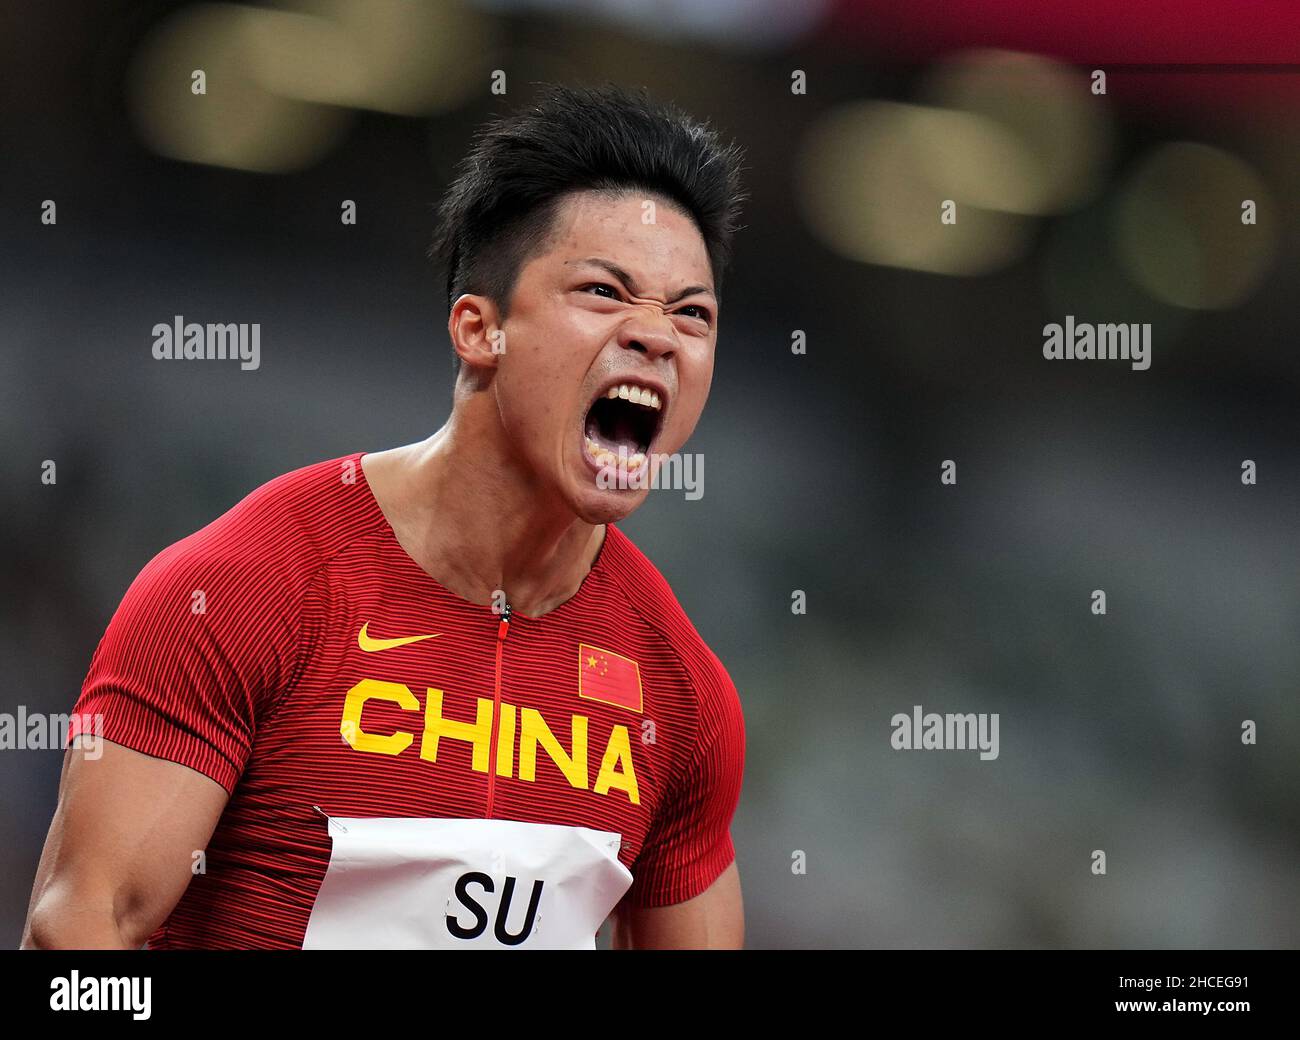 Beijing, China. 1st Aug, 2021. File photo taken on Aug. 1, 2021 shows Su Bingtian of China reacting after the men's 100m semifinal at the Tokyo 2020 Olympic Games, in Tokyo, Japan. Su Bingtian set a new Asian record in the men's 100-meter dash with a time of 9.83 seconds at the Tokyo Olympics semifinals to become the first Chinese sprinter to qualify for the final of the event. The 32-year-old also led the Chinese men's 4x100m relay team to finish fourth. He was then crowned the fastest man at the National Games in 9.95 seconds. Credit: Lui Siu Wai/Xinhua/Alamy Live News Stock Photo